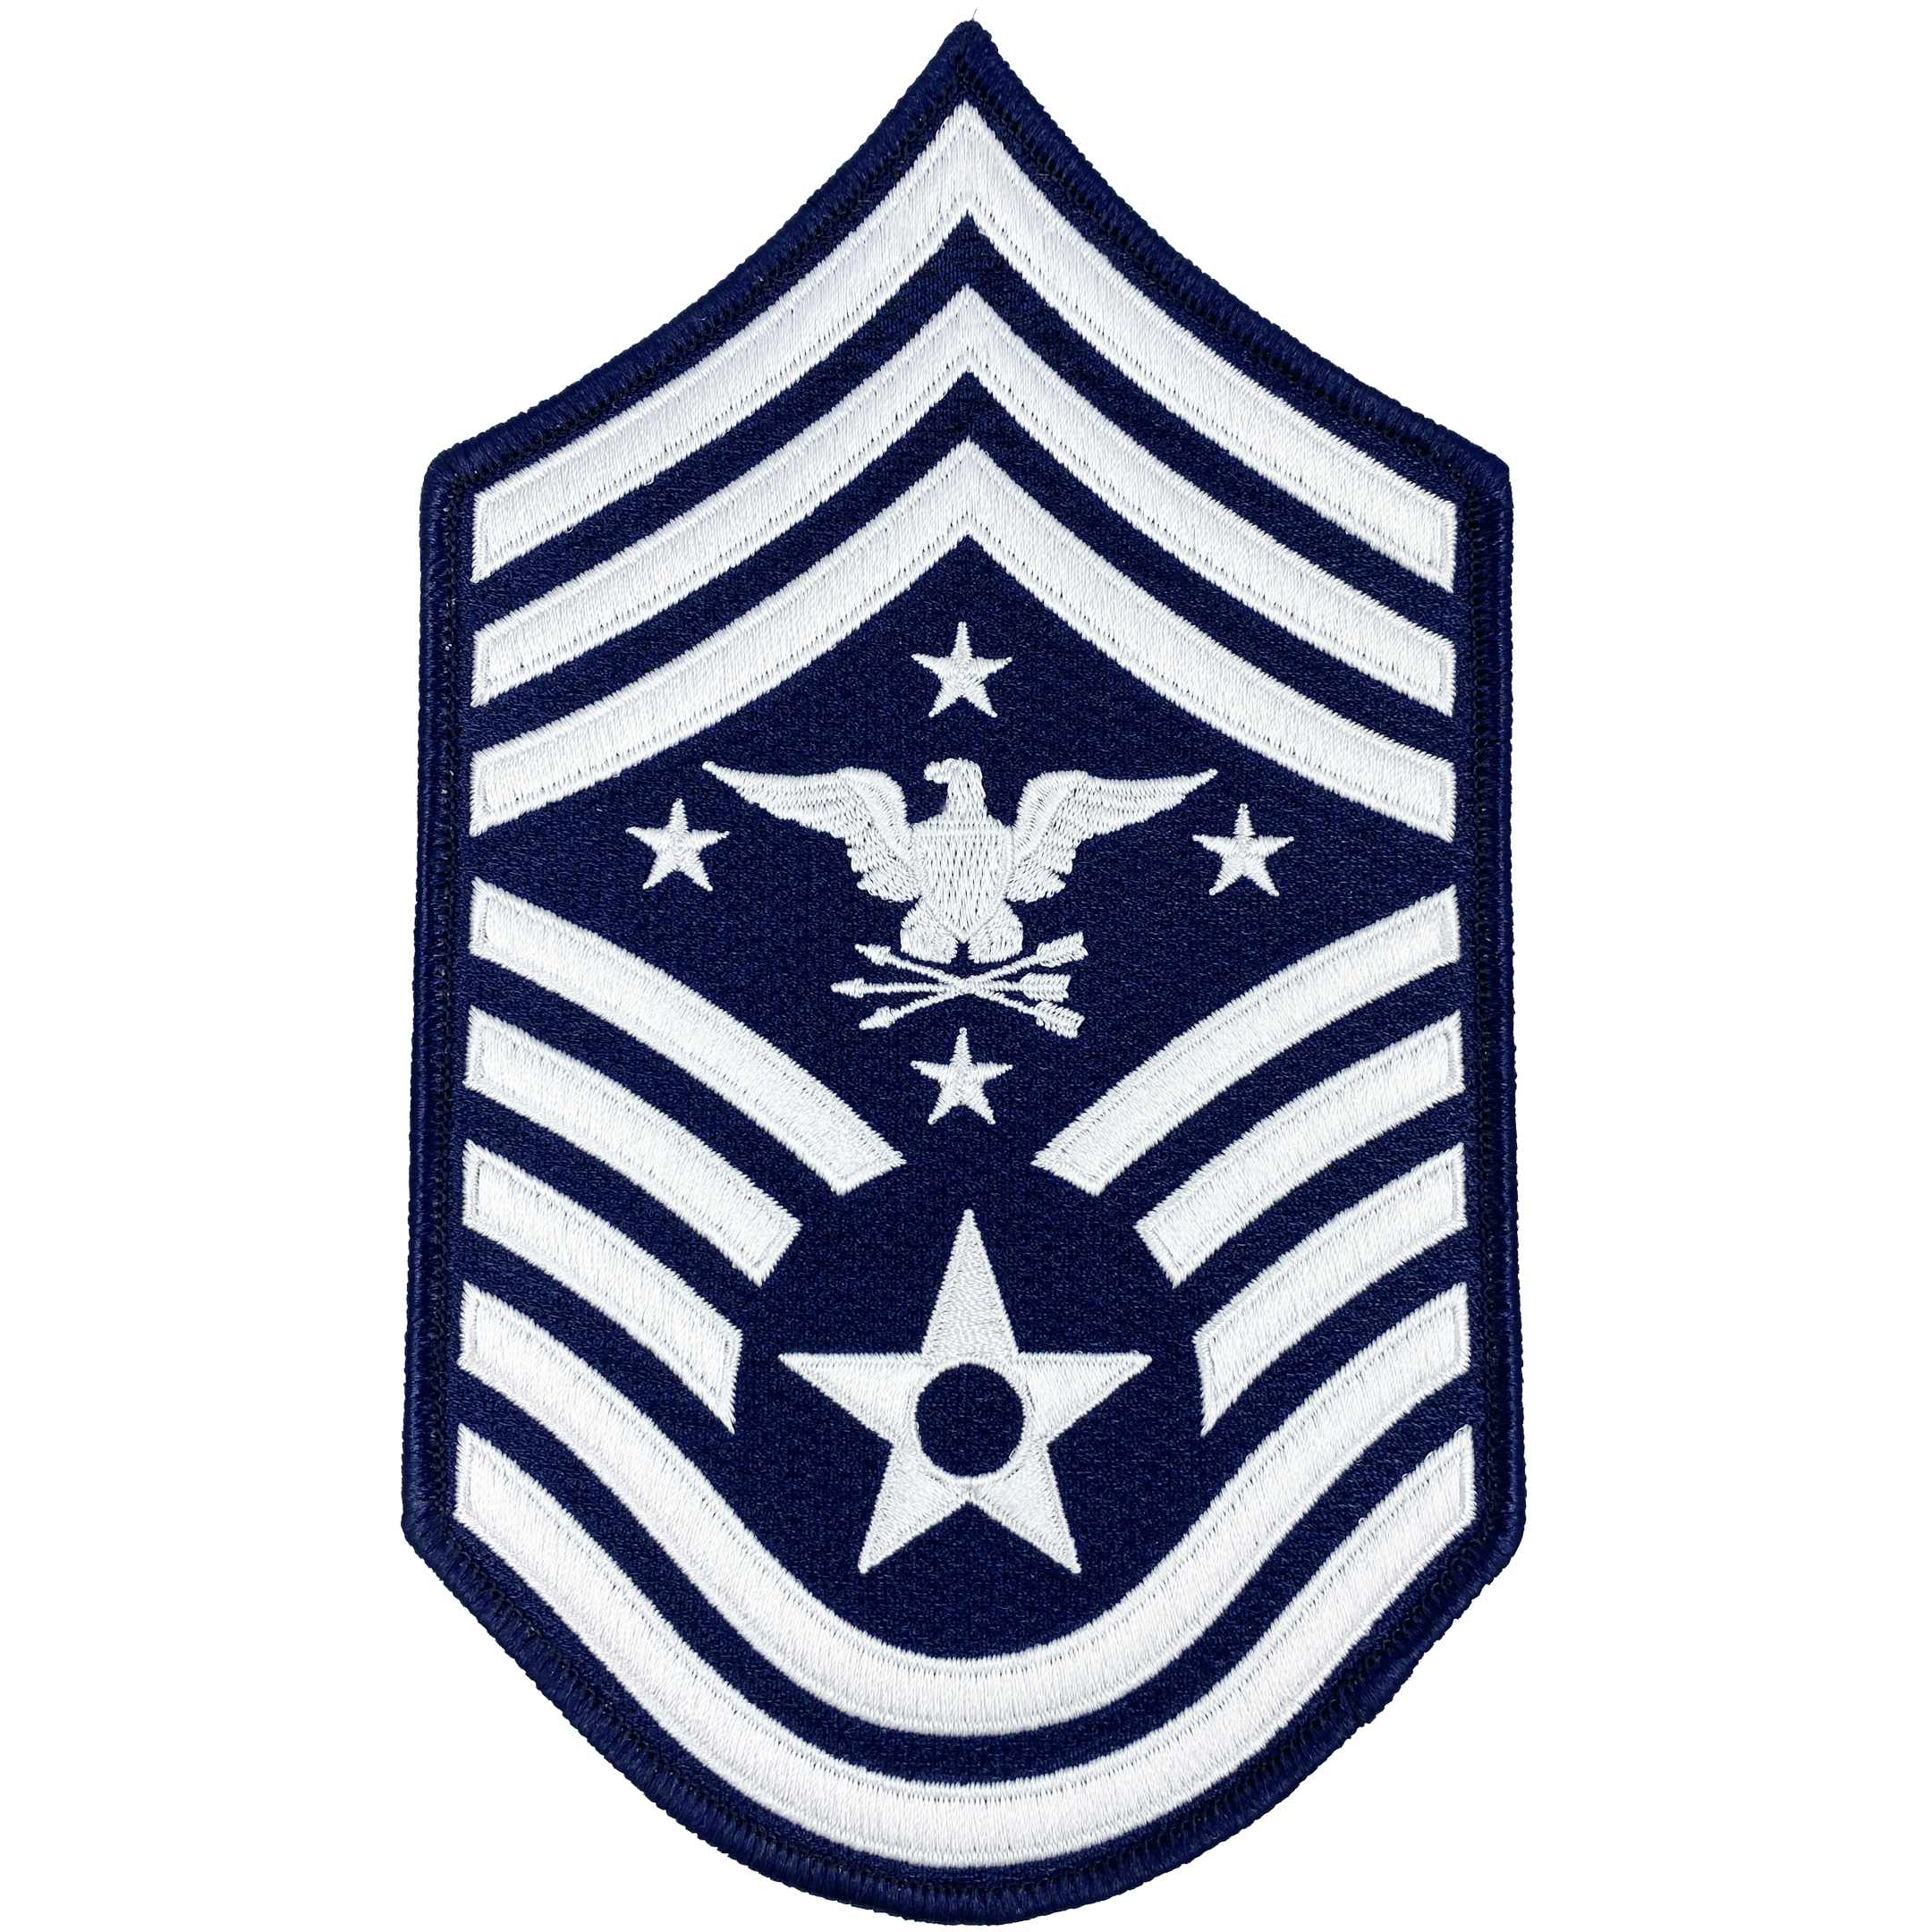 DL1-14 Senior Enlisted Advisor to the Chairman of the Joint Chiefs of Staff Air Force Senior Enlisted Advisor Chief Master Sergeant Rank (Eagle Looking Left) USAF Patch 